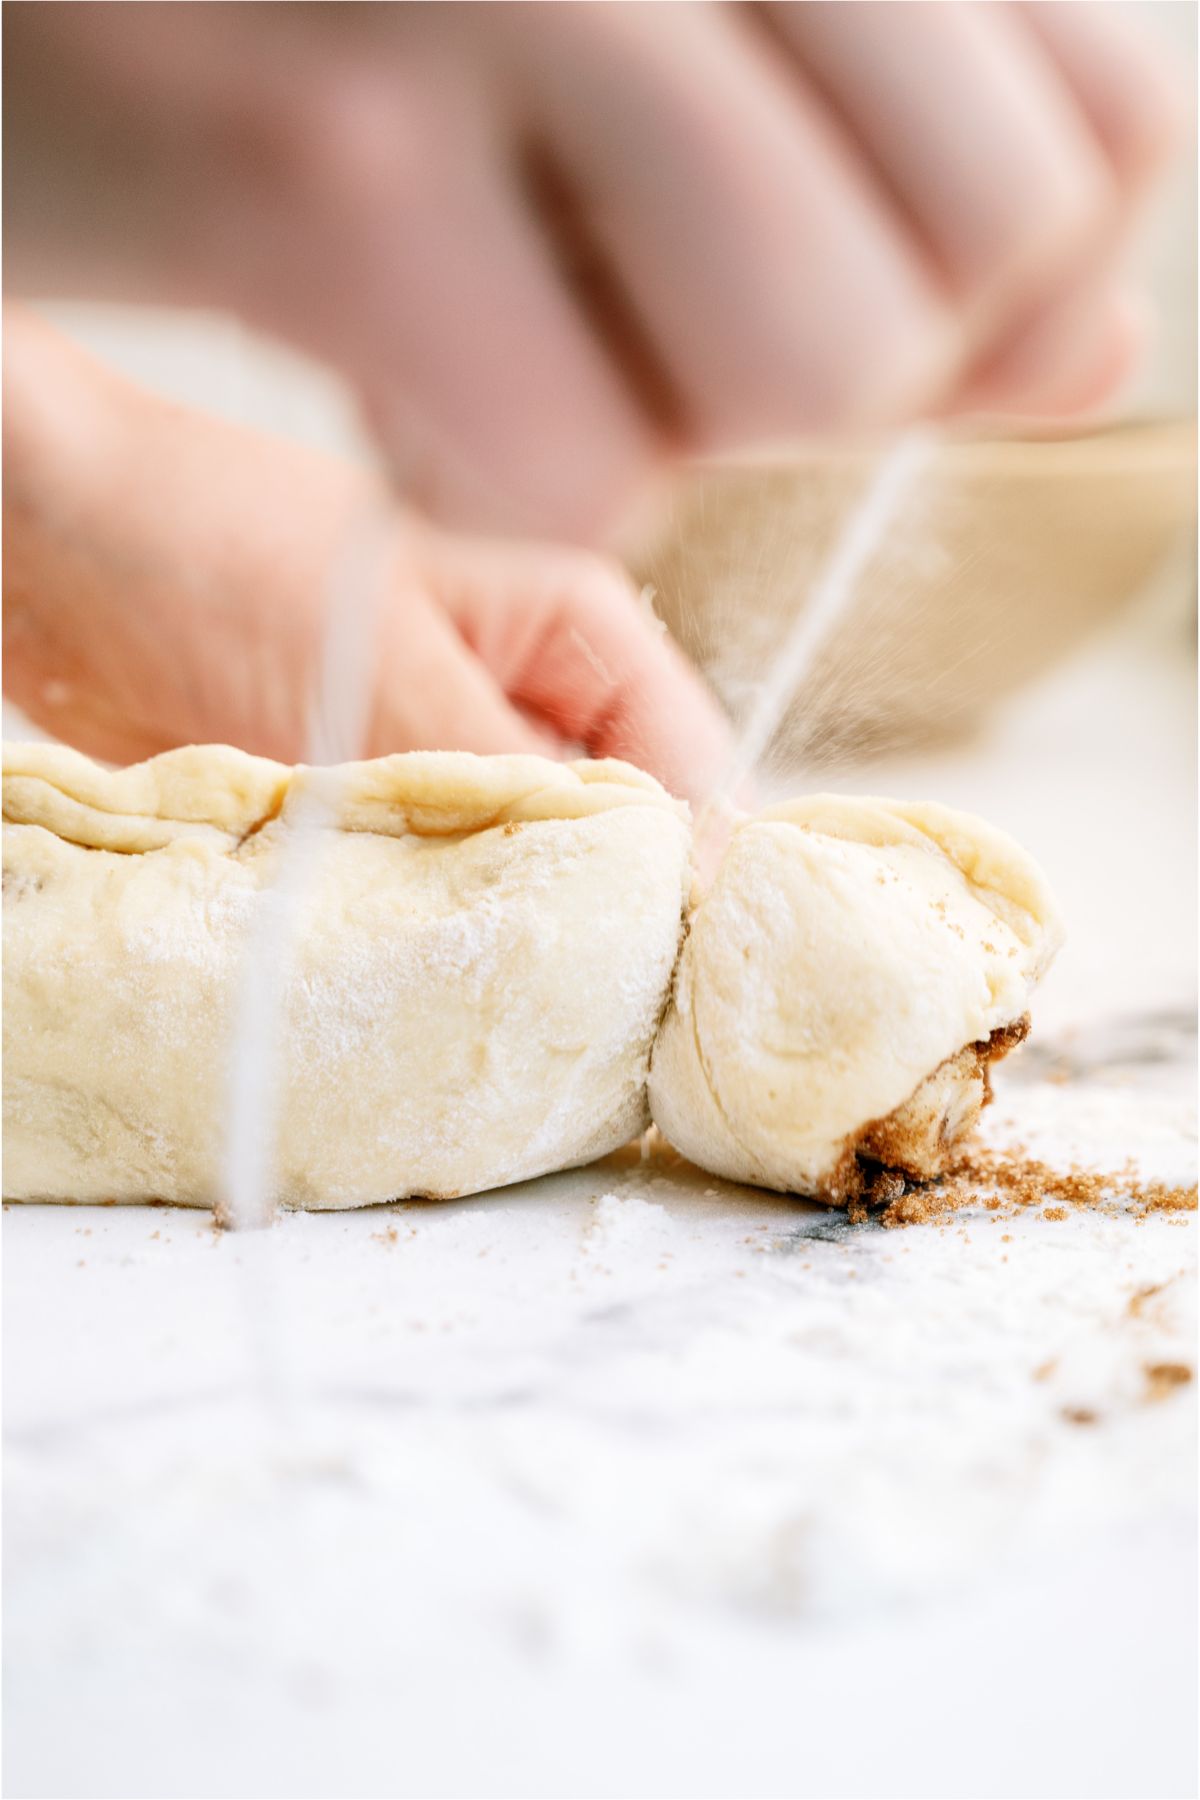 Slicing the The BEST Homemade Cinnamon Rolls dough with dental floss